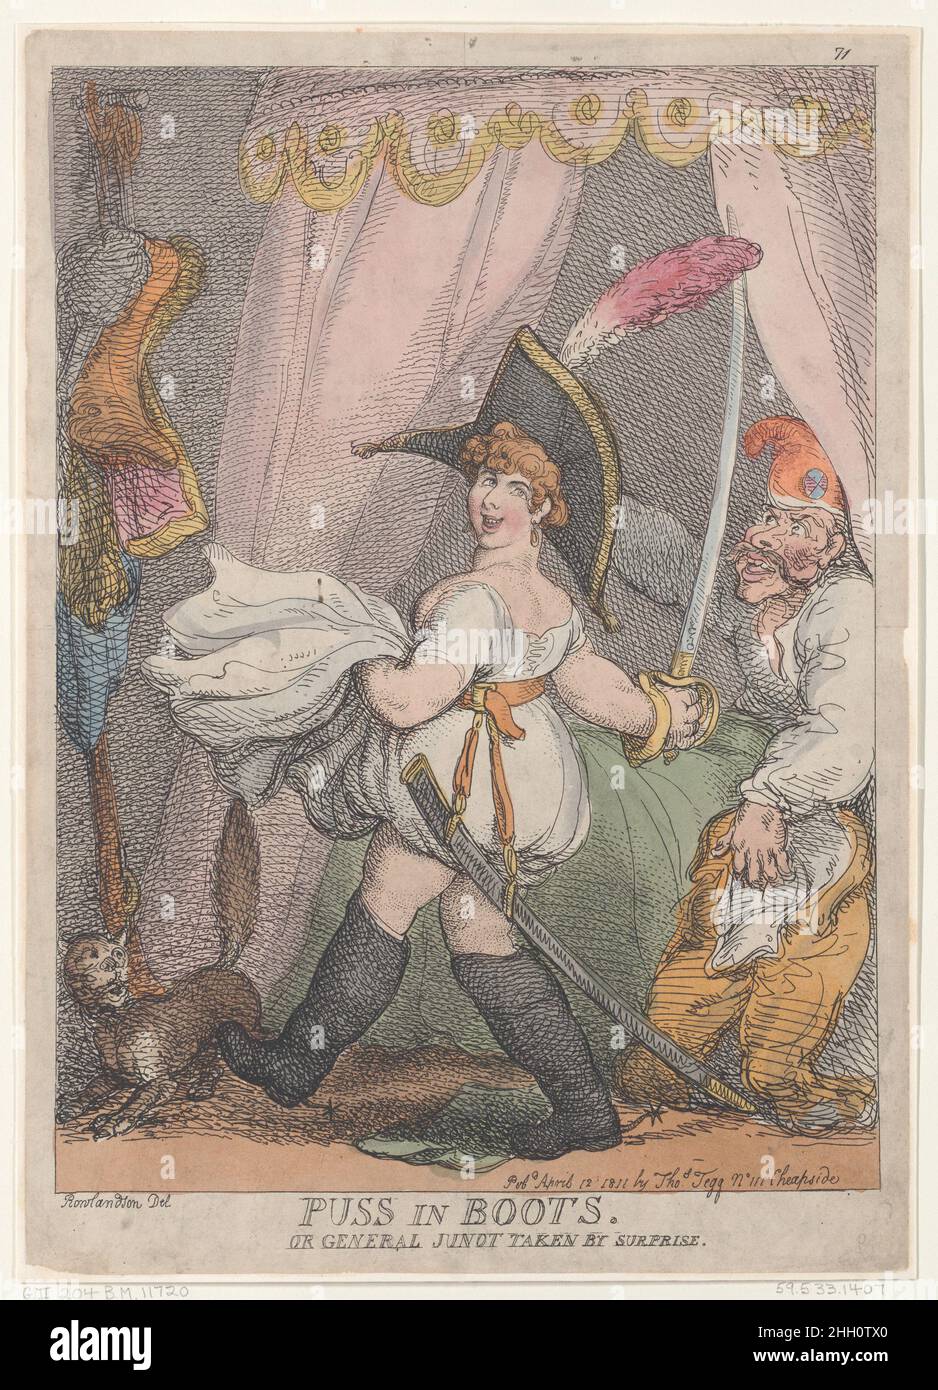 Puss in Boots or General Junot Taken by Surprise April 12, 1811 Thomas Rowlandson A woman, girding up the skirts of her dress, has dressed up in the cocked hat, boots, and sword-belt of General Junot, and joyfully marches beside his bed, brandishing his sword in her right hand, while she looks over her shoulder at the general. Junot sits up in bed at right and looks at her angrily.. Puss in Boots or General Junot Taken by Surprise. Thomas Rowlandson (British, London 1757–1827 London). April 12, 1811. Hand-colored etching. Thomas Tegg (British, 1776–1846). Prints Stock Photo